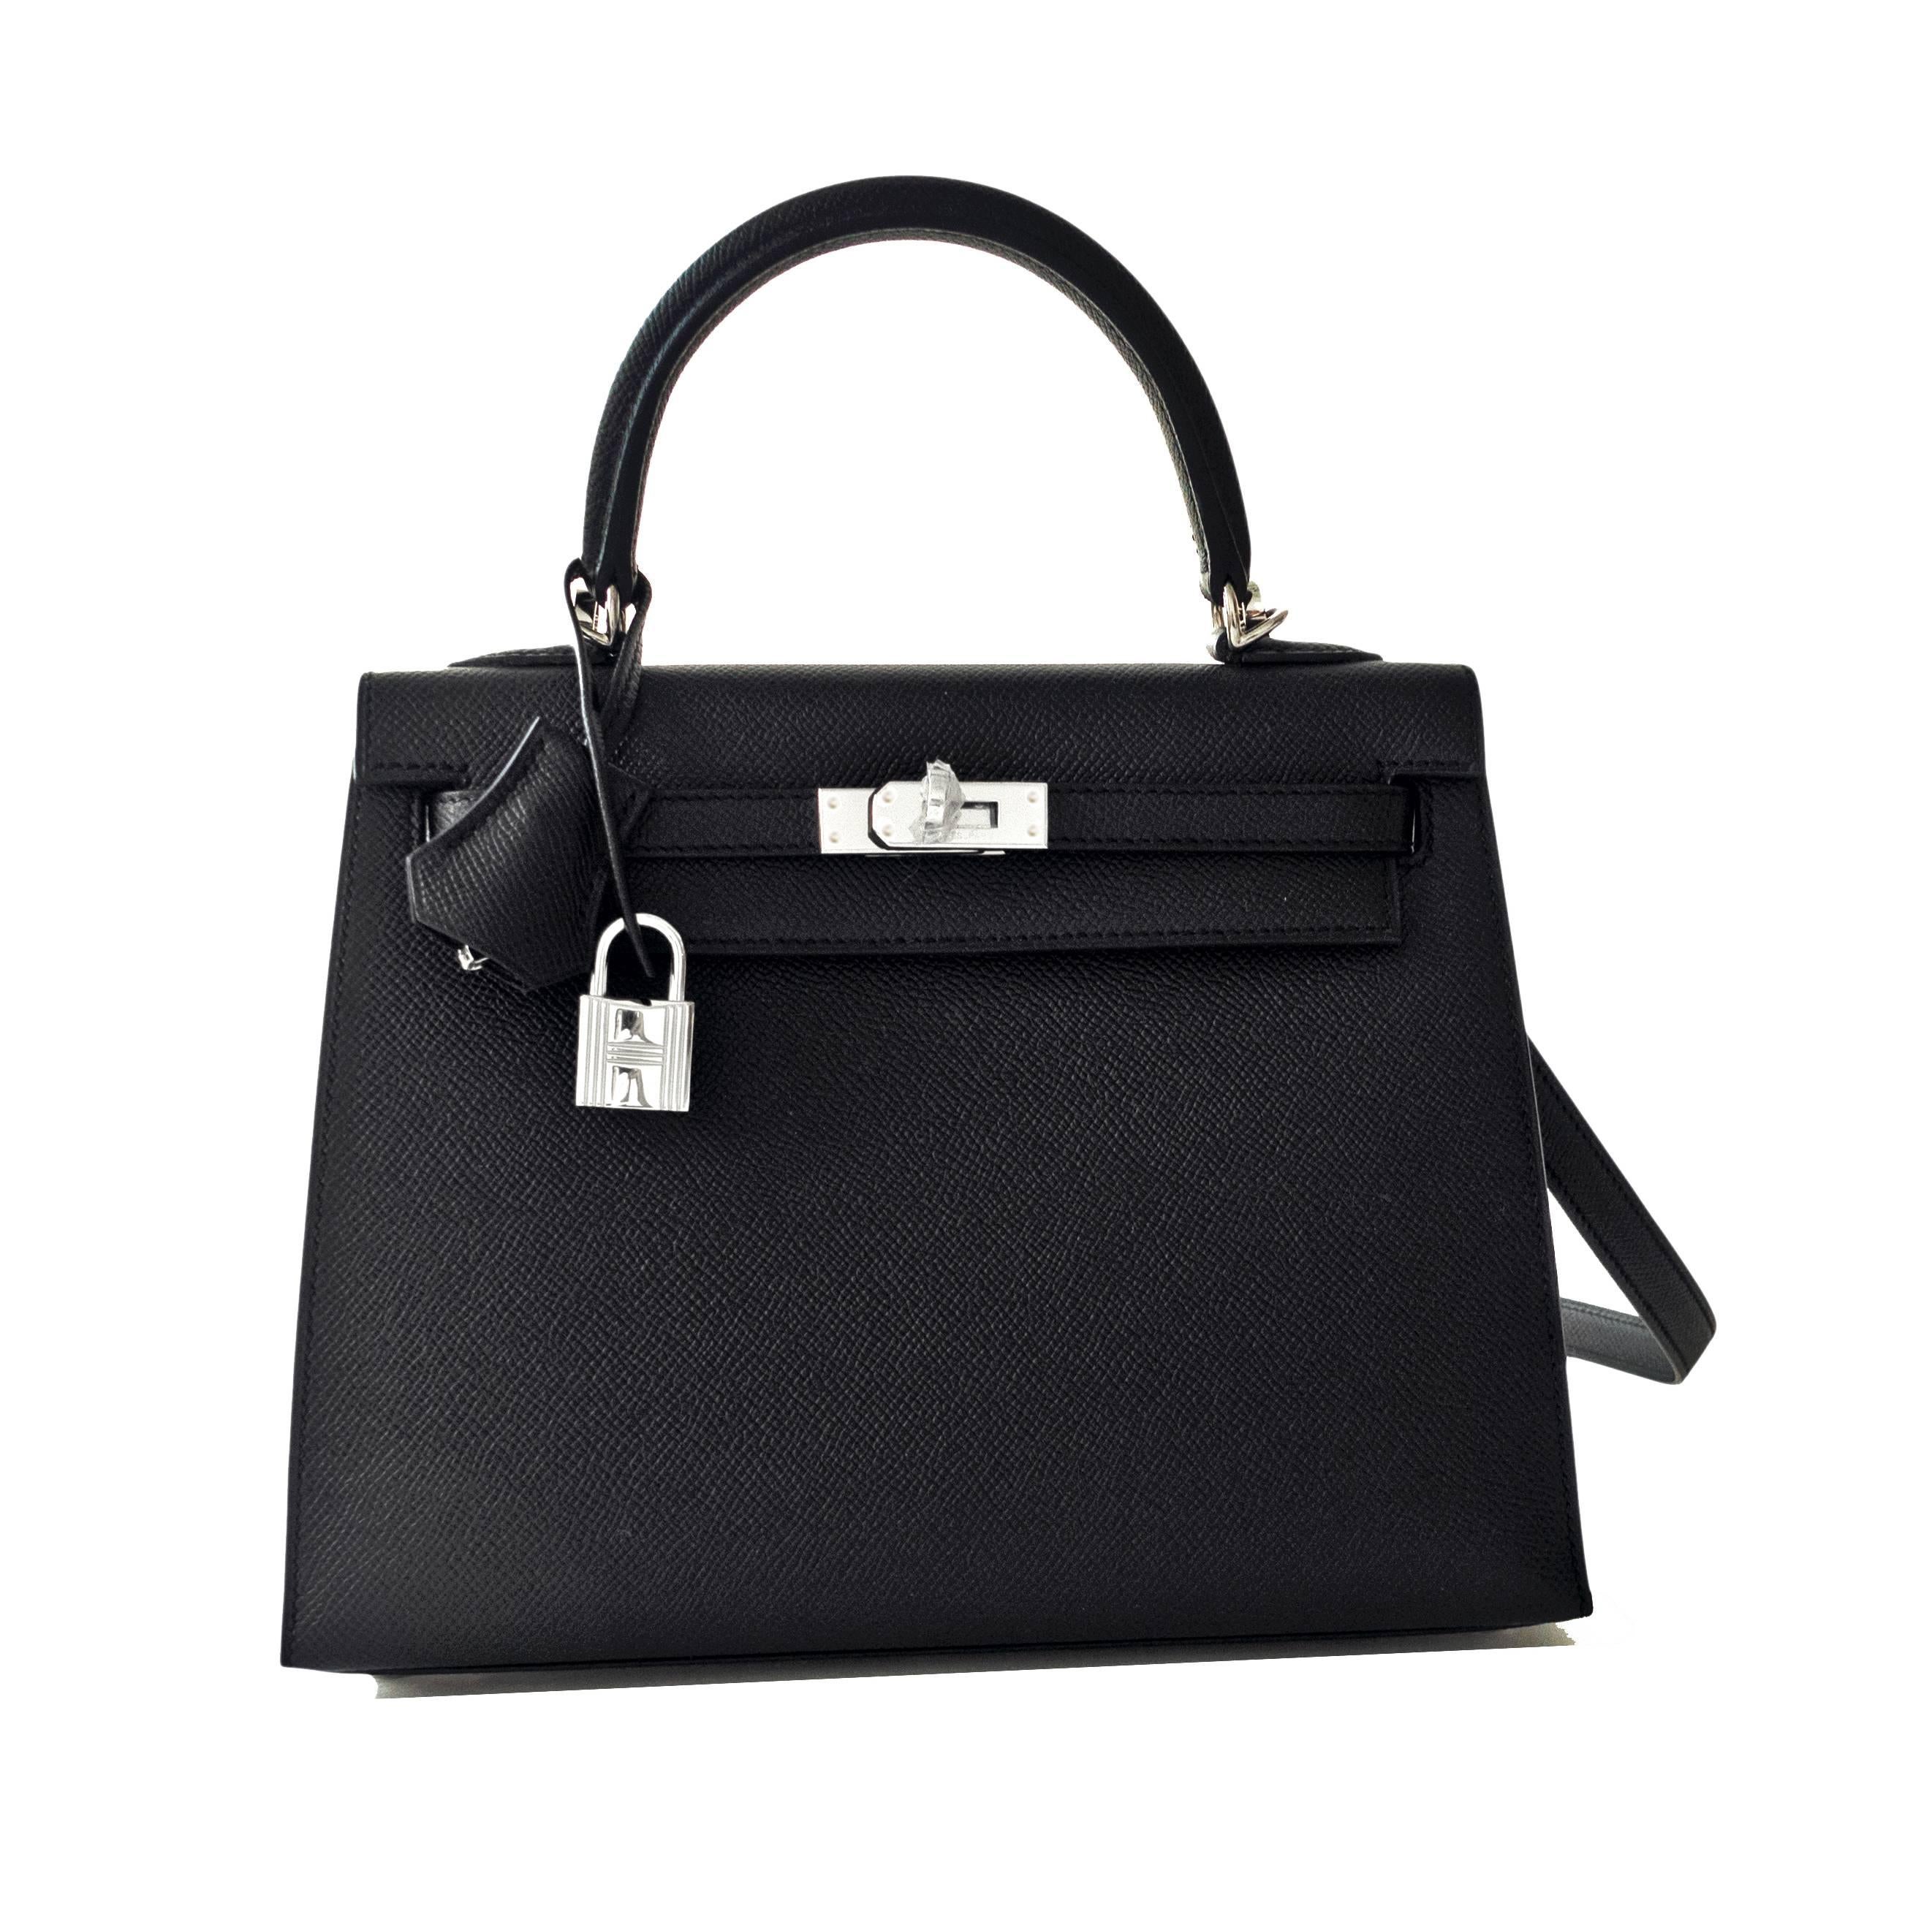 Uber Chic Hermes Jet Black 25cm Kelly Epsom Sellier Palladium Jewel
Brand New in Box. Store Fresh. Pristine Condition (with plastic on hardware).
Perfect gift! Comes full set with keys, lock, clochette, shoulder strap, sleeper, rain protector, and